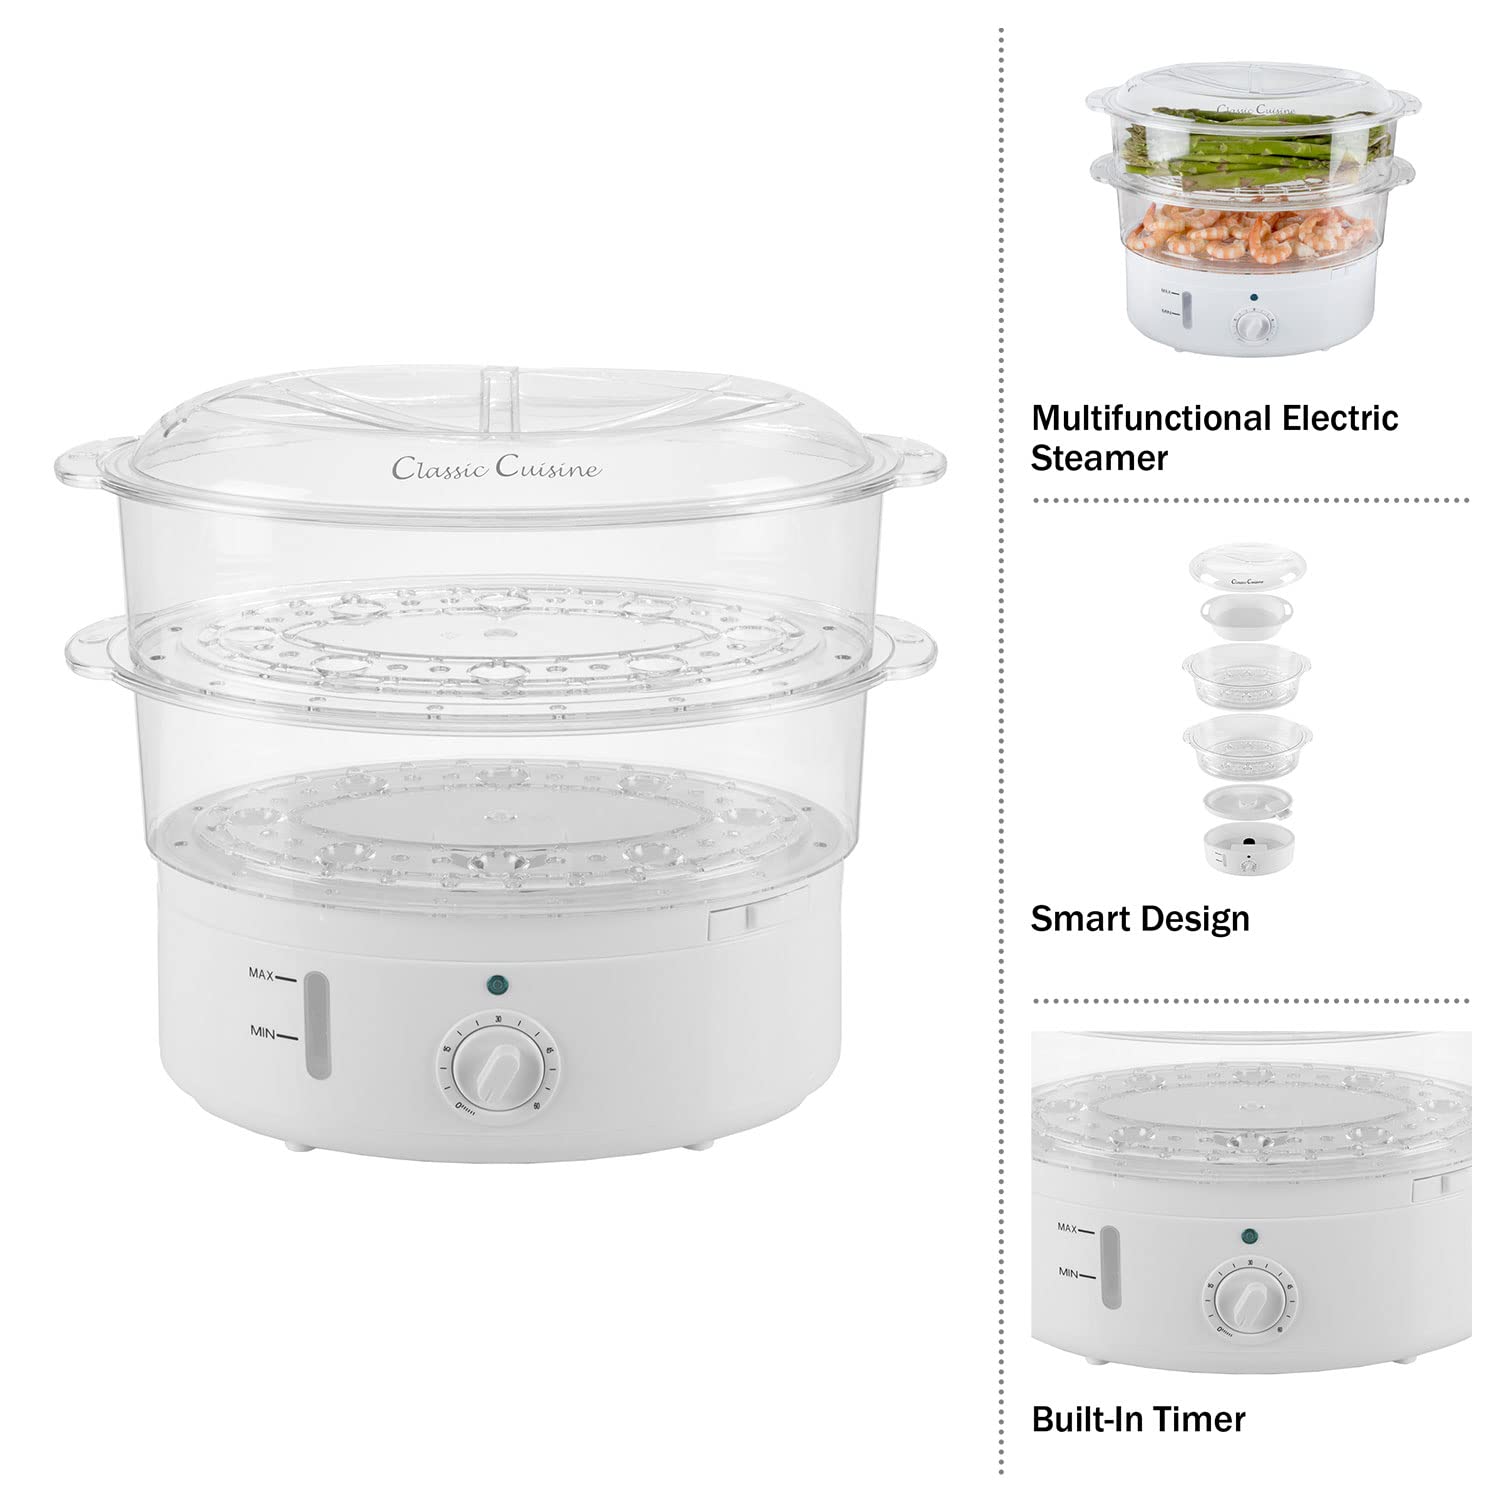 Classic Cuisine Food Steamer and Rice Cooker in one, Two-Tier Food Steamer for Healthy Meals anytime, cooks Vegetables, Fish, Dumplings, Eggs and more, 6.3 QT, Clear